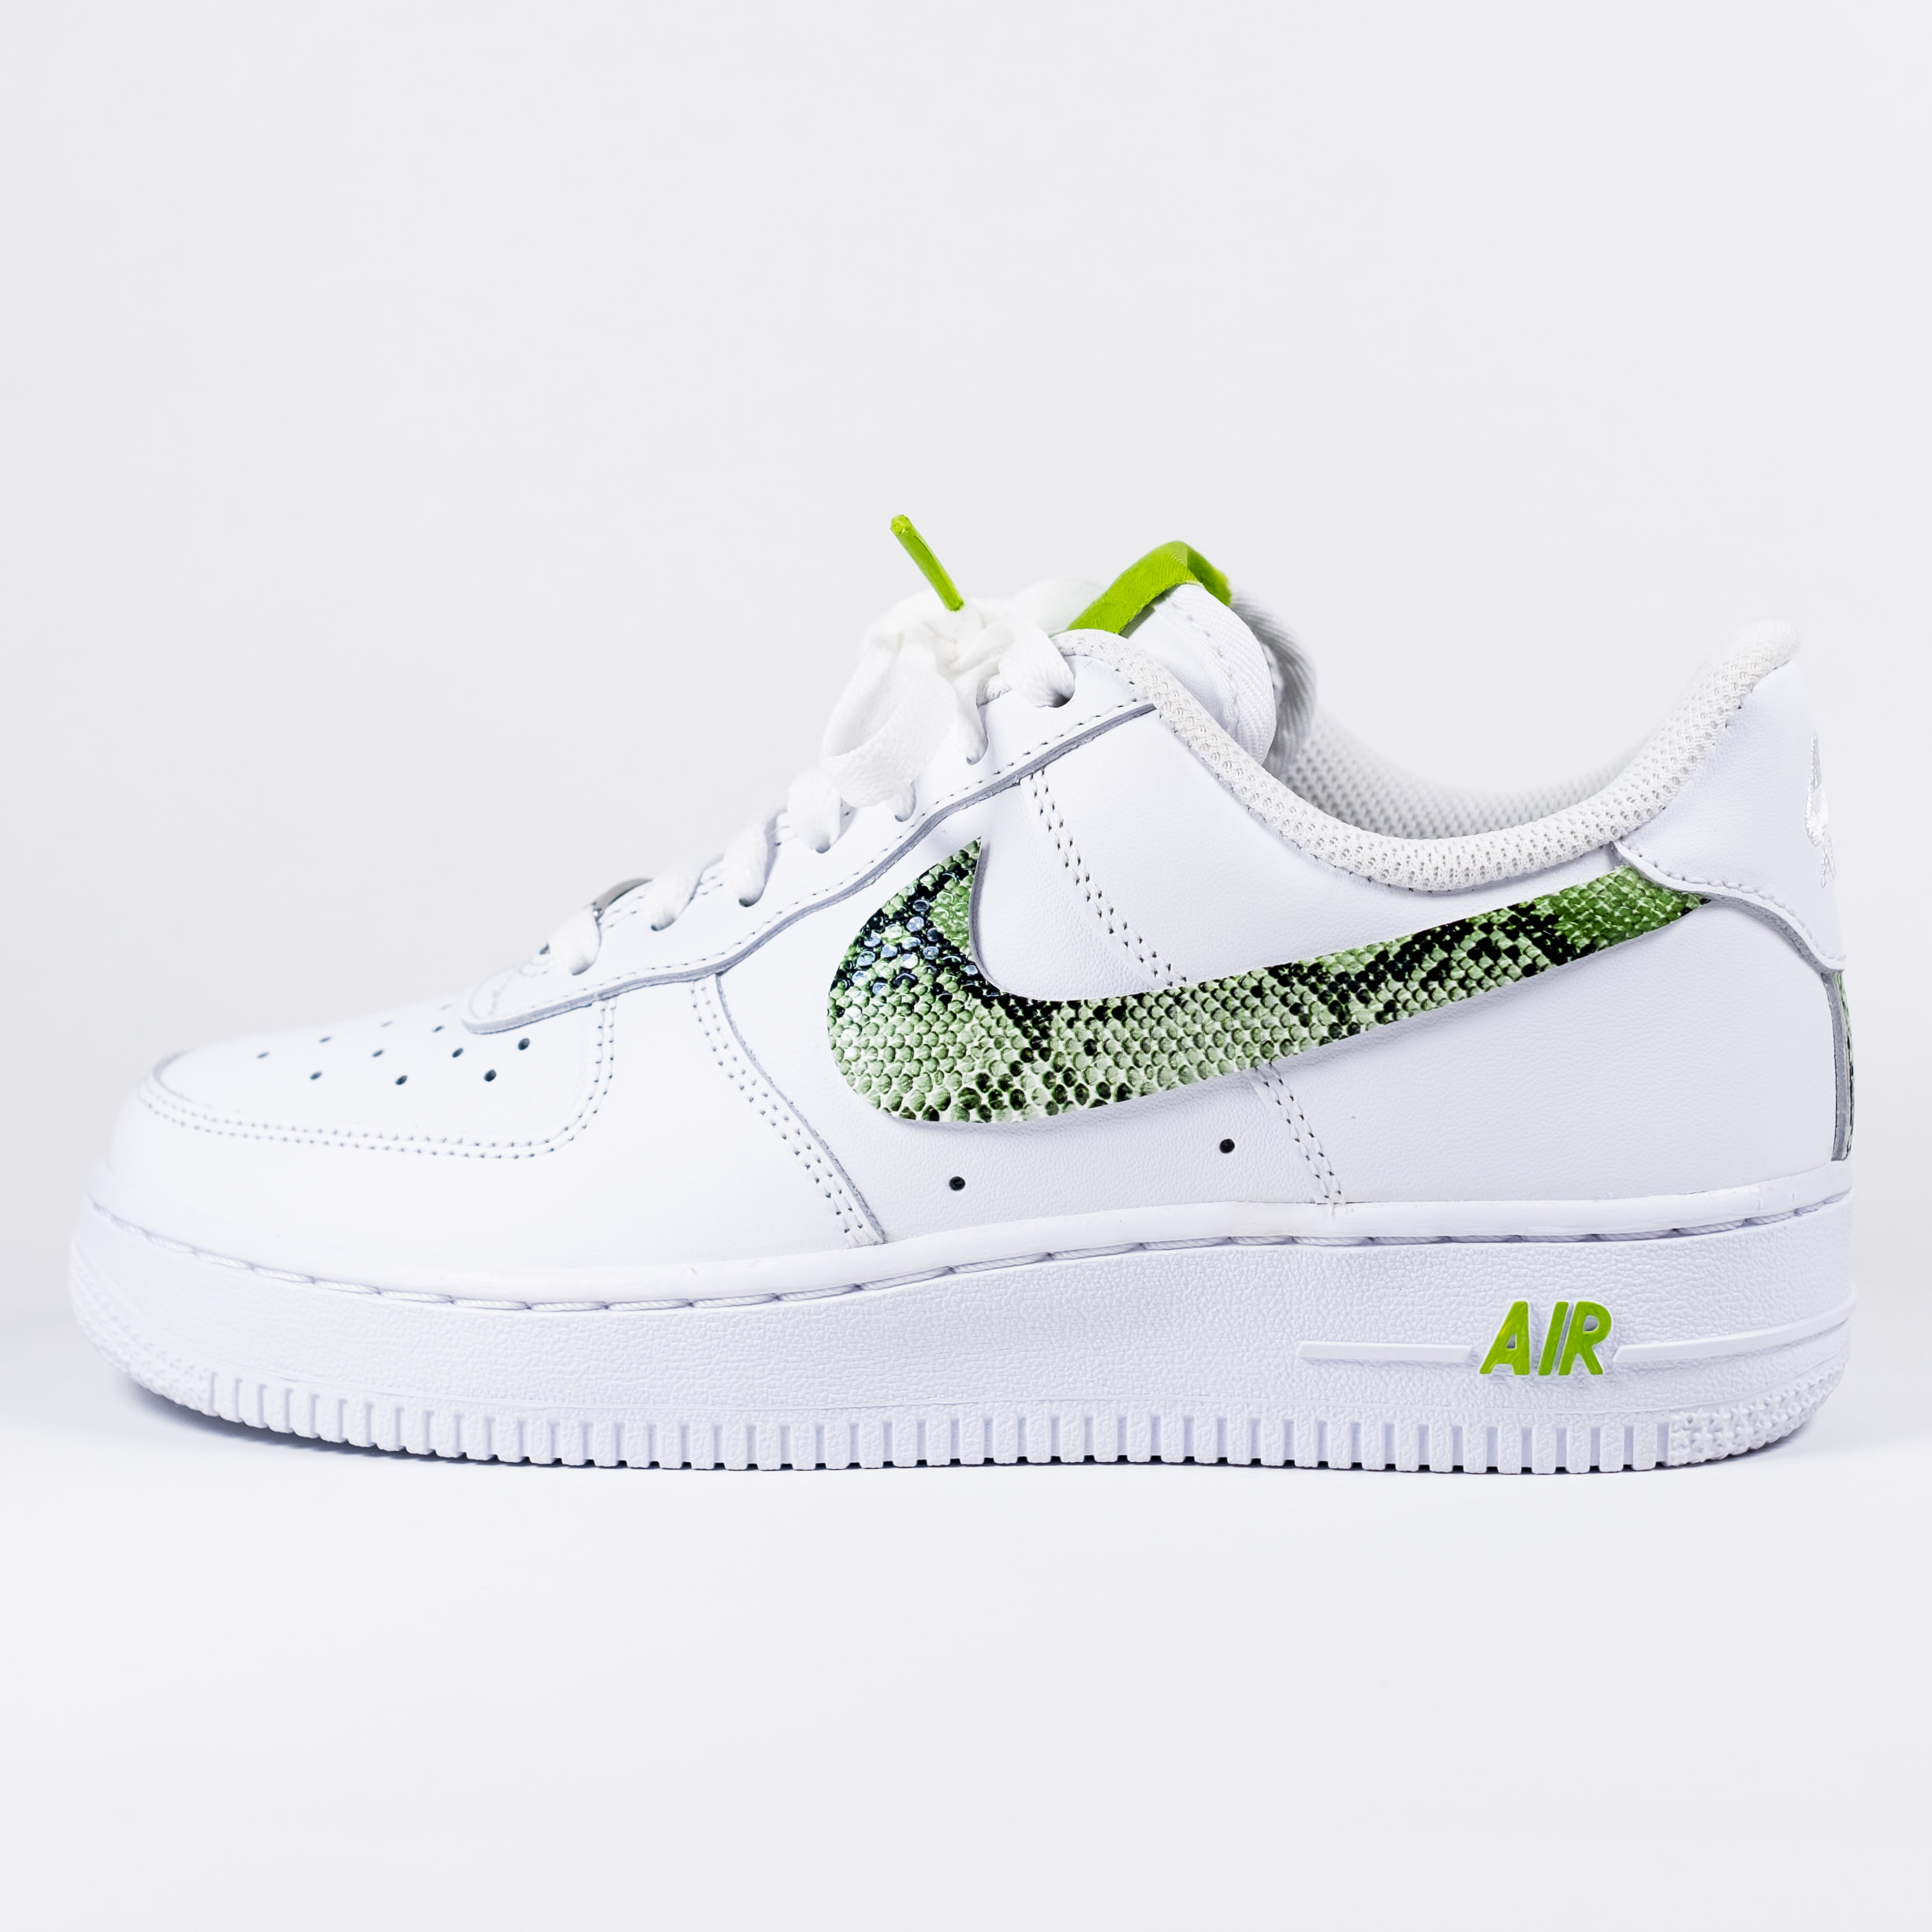 Nike Air Force 1 '07 Lime Womens Lifestyle Shoes White Lime Green